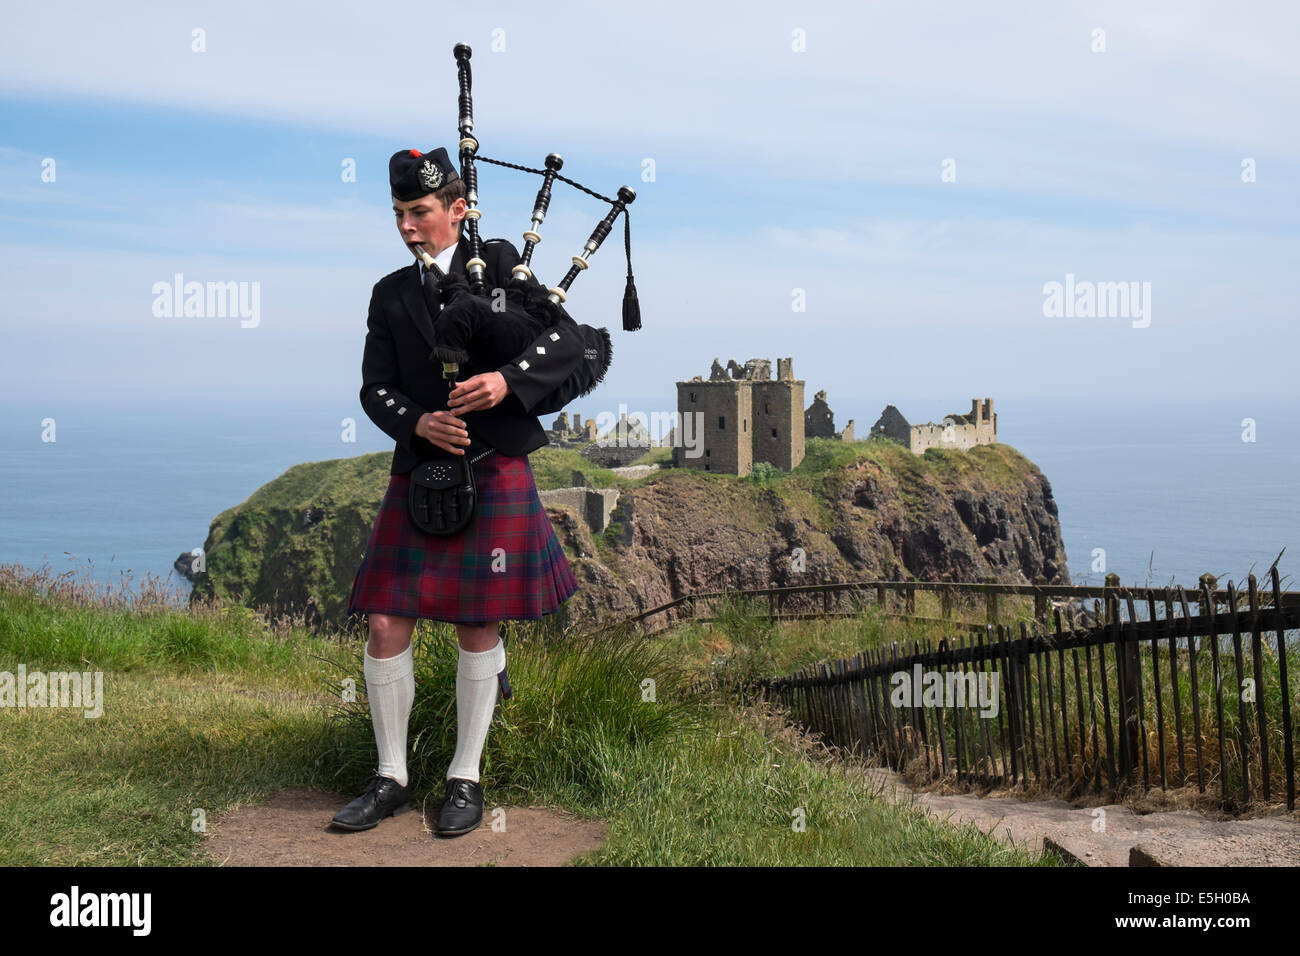 Piper playing bagpipes in traditional Scottish kilt at Dunnottar Castle near Stonehaven in Aberdeenshire Scotland UK Stock Photo